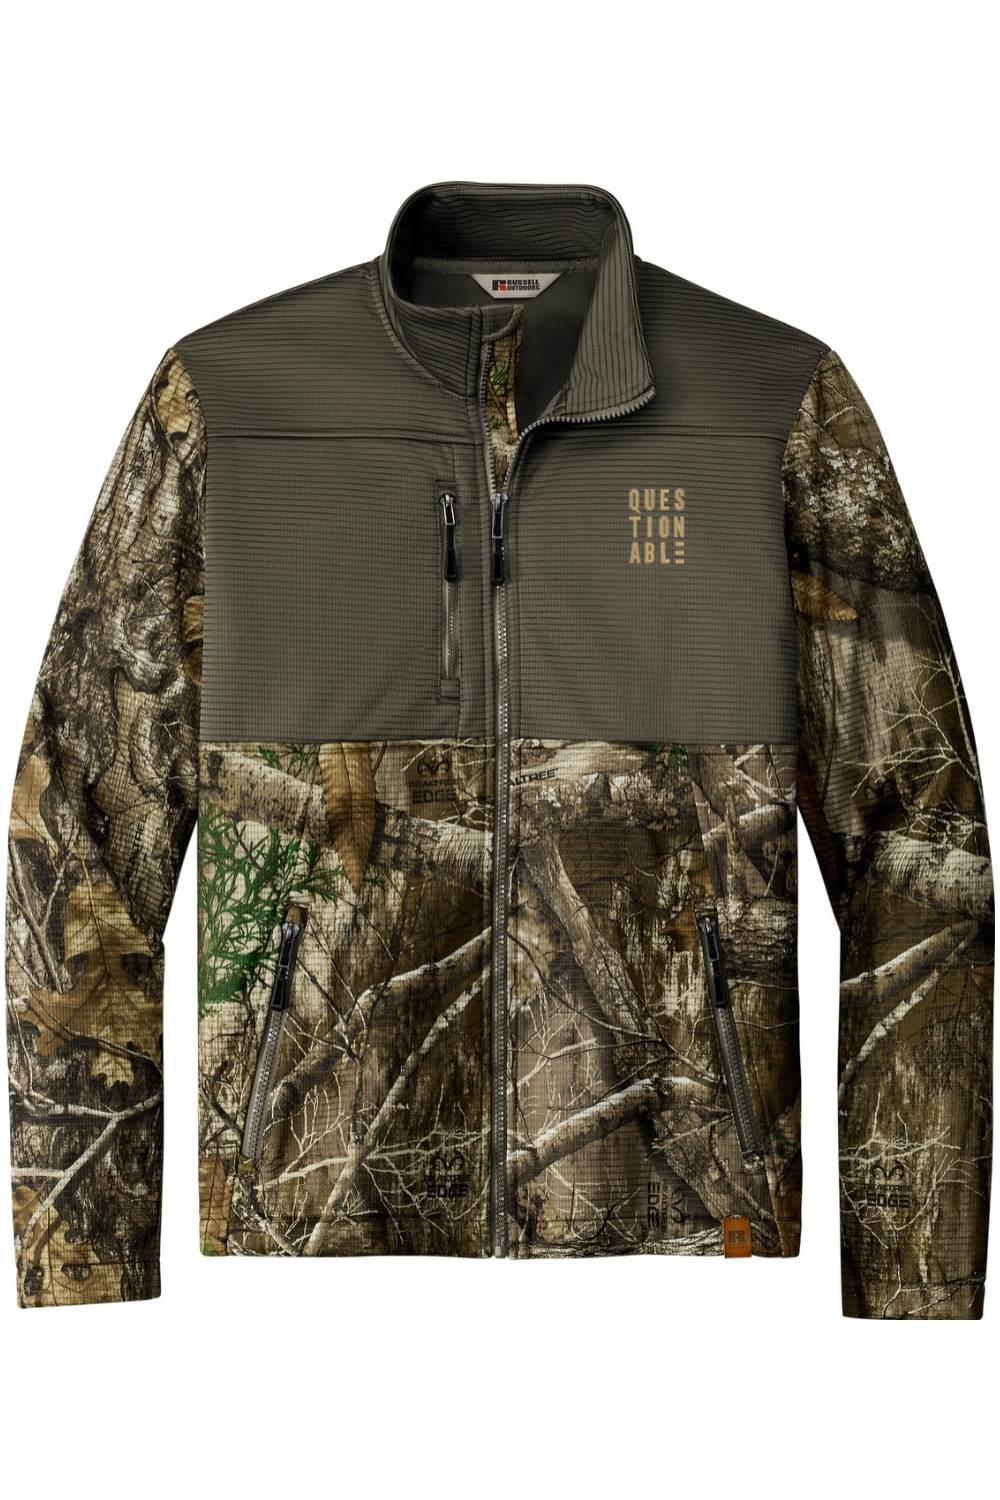 Questionable - Realtree Atlas Colorblock Soft Shell